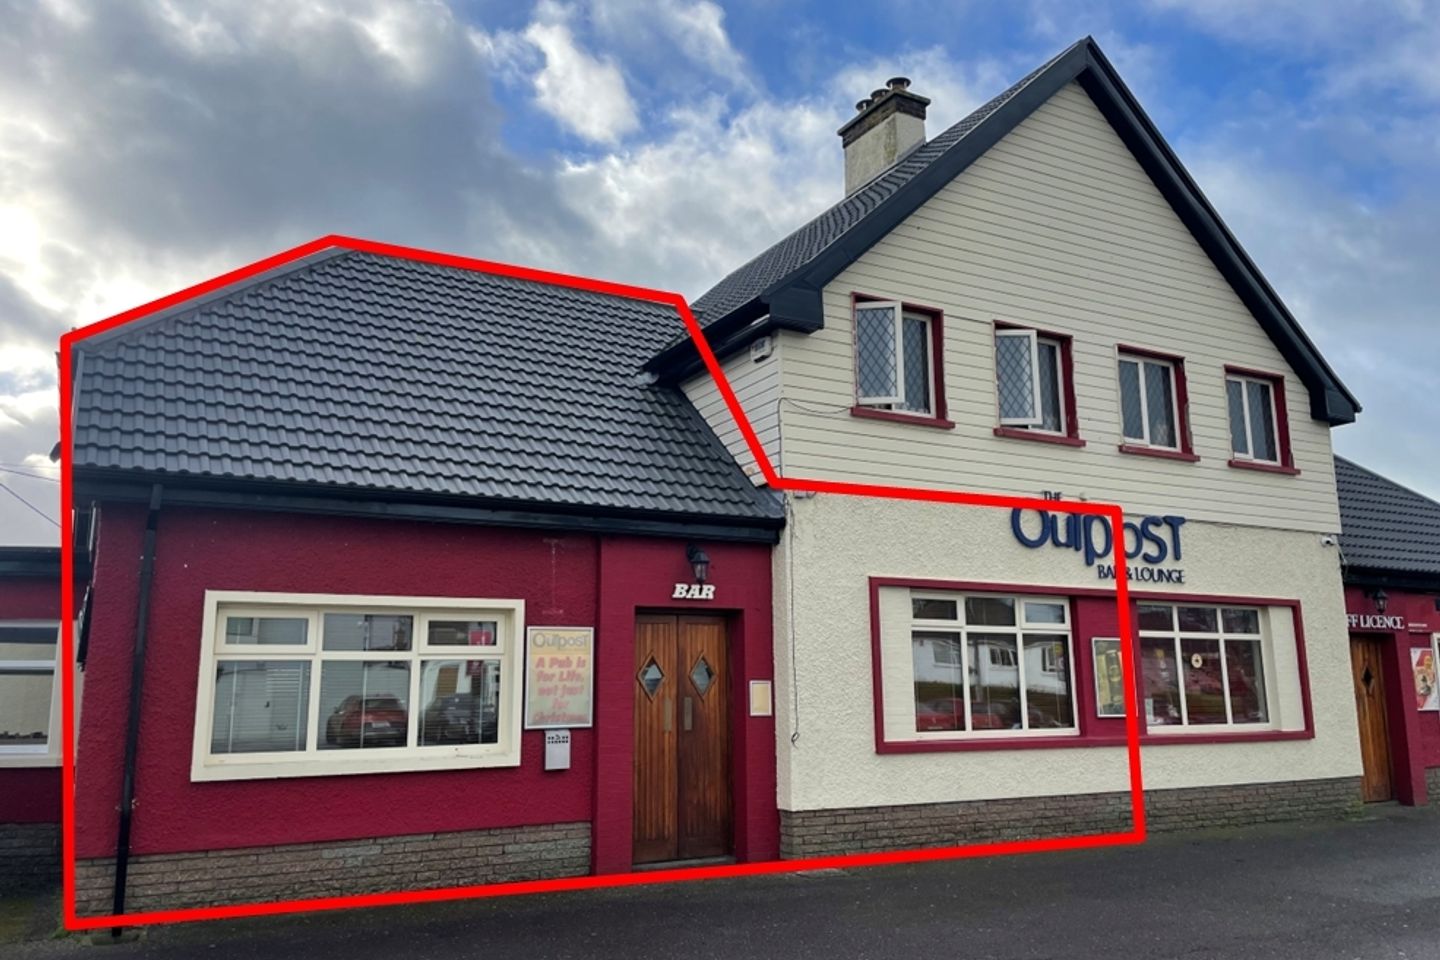 The Outpost, Curraheen road, Bishopstown, Co. Cork